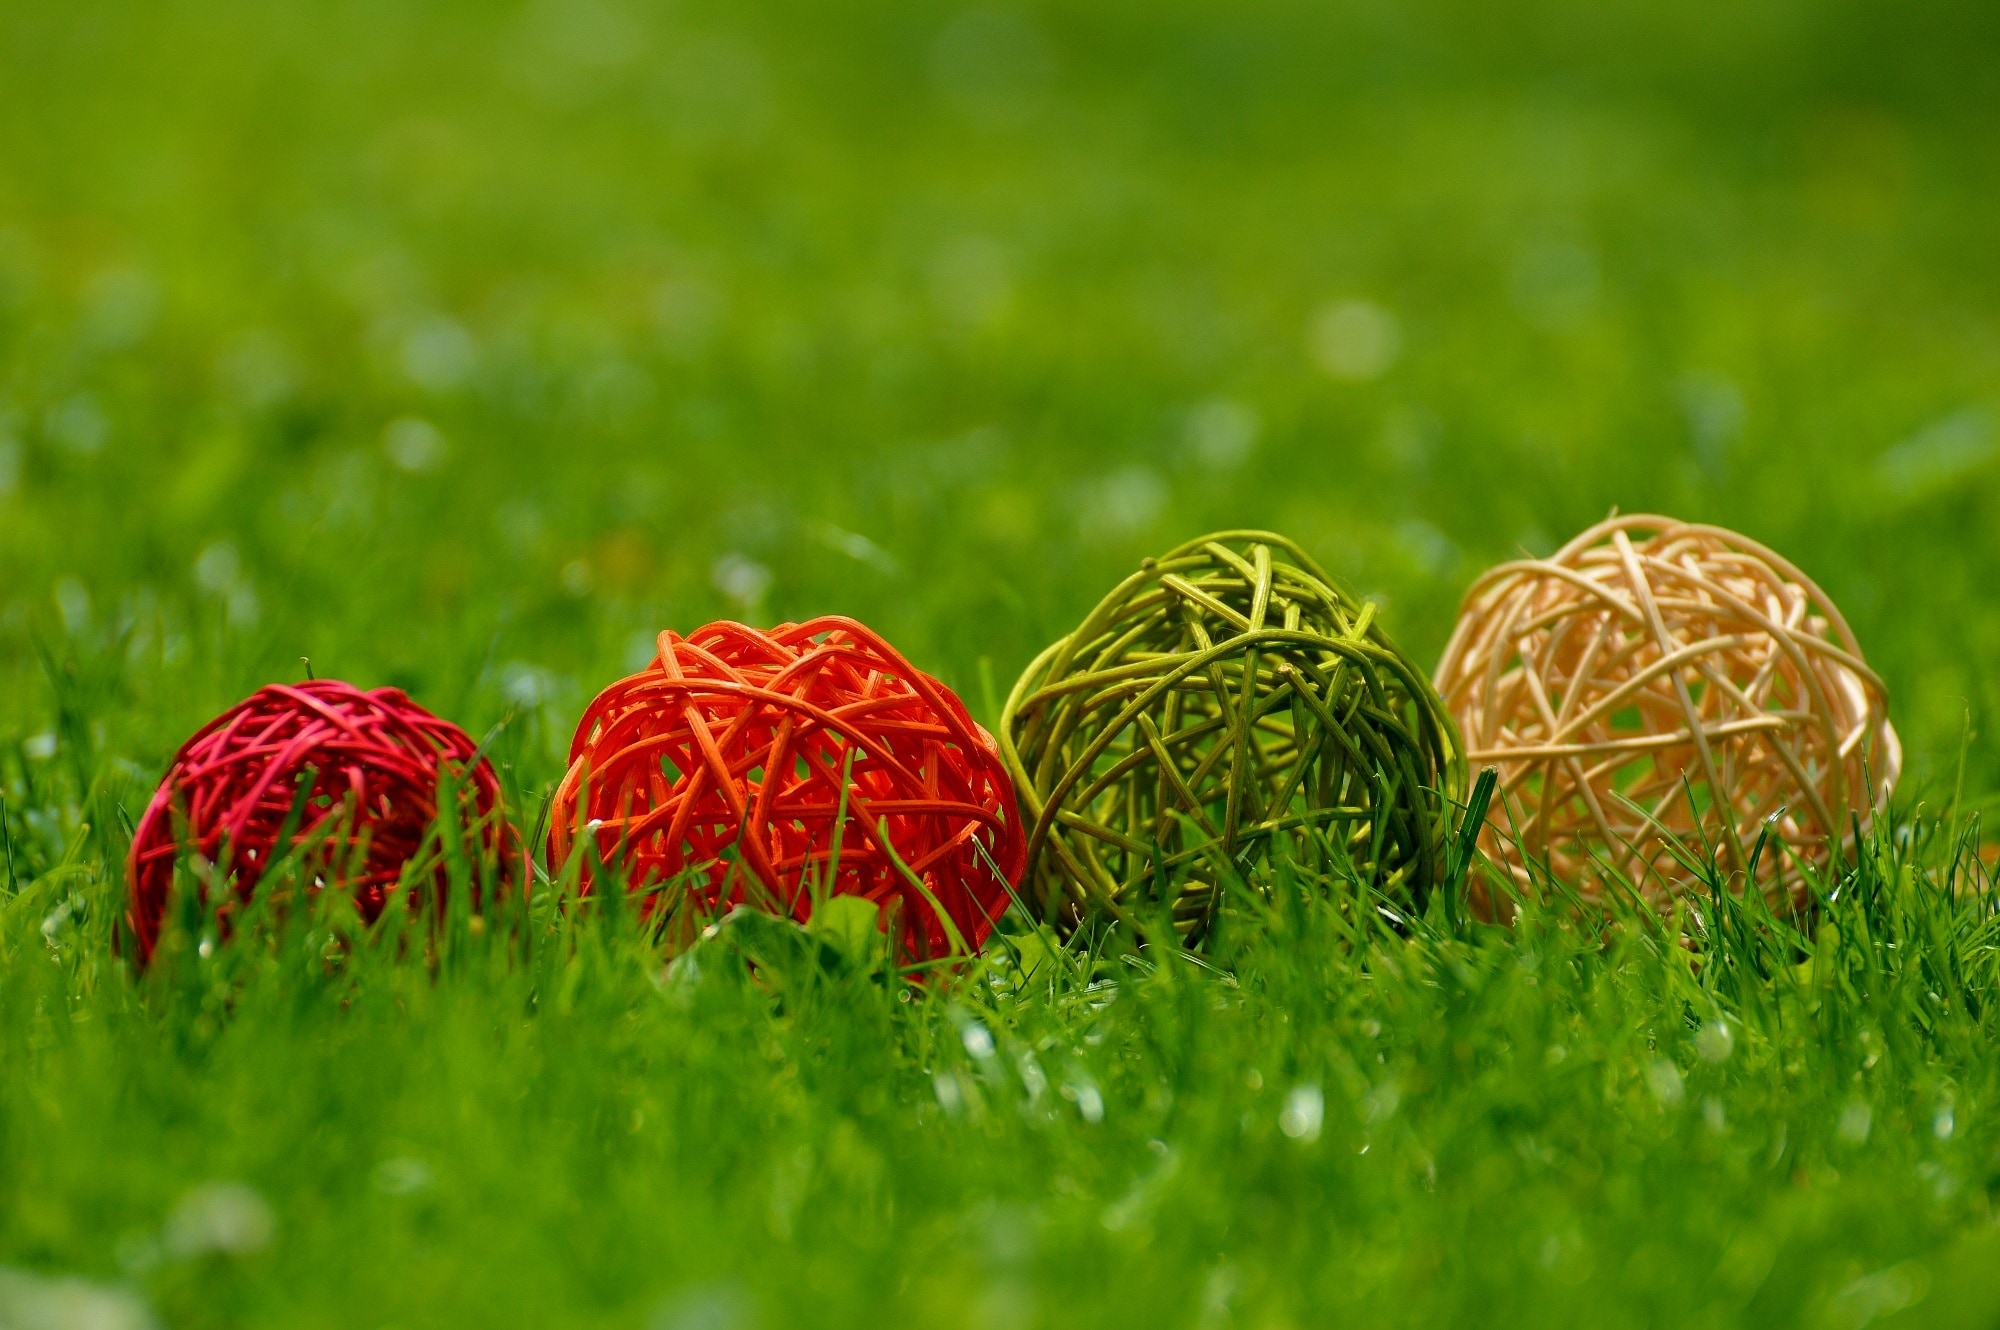 Balls, Decoration, Colorful, Wood, grass, green color